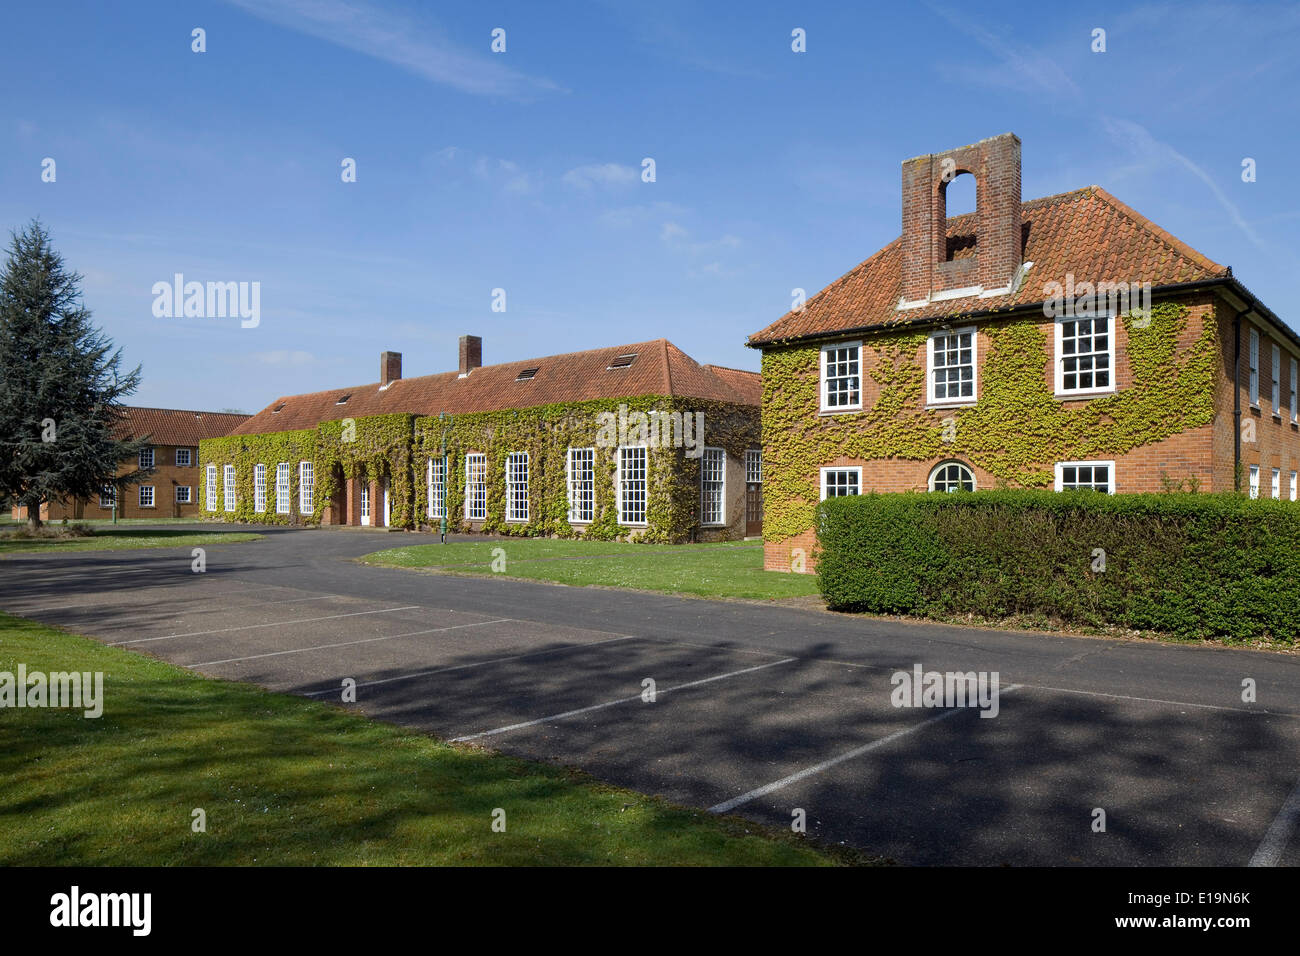 Officers Mess RAF Duxford, Duxford, United Kingdom. Architect: Unknown. Royal Air Force, 1933. Exterior view of front facade of Stock Photo